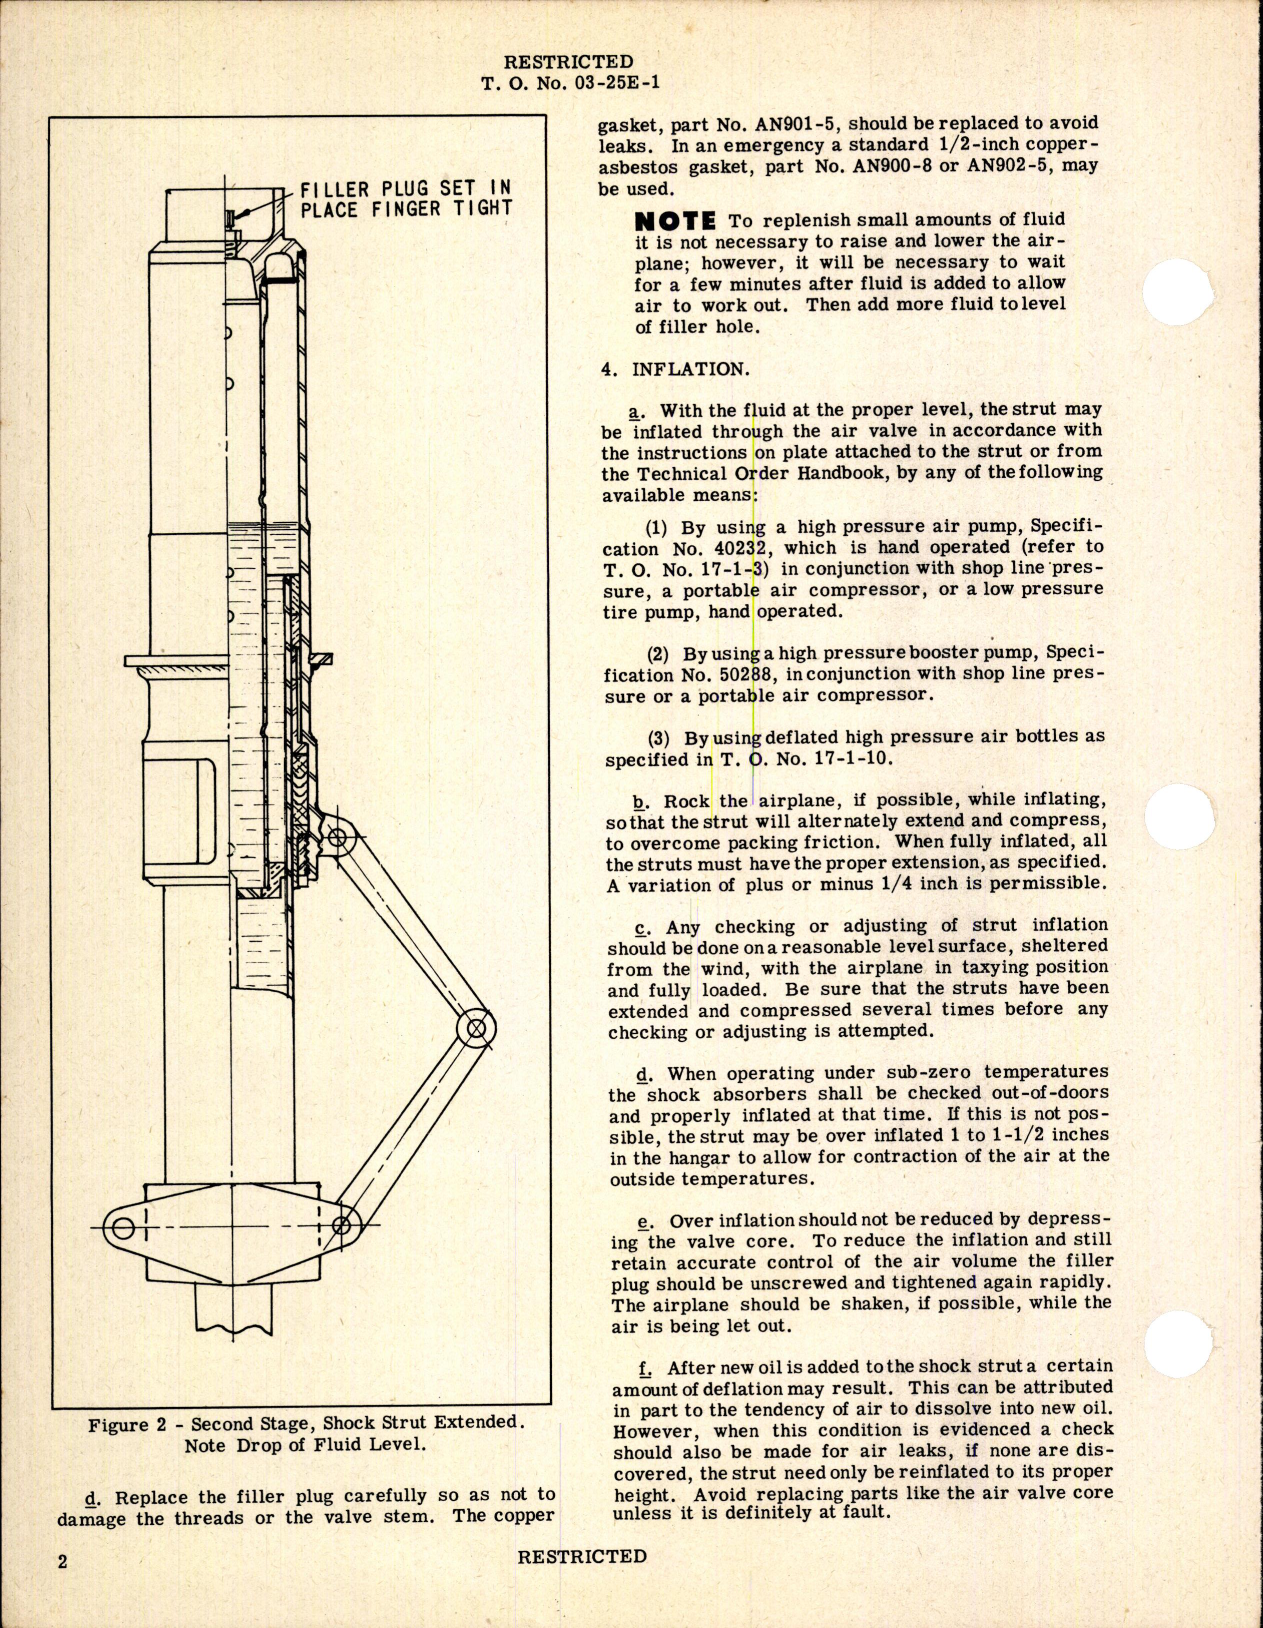 Sample page 2 from AirCorps Library document: Shock Struts - Air-Oil Shock Absorber Struts